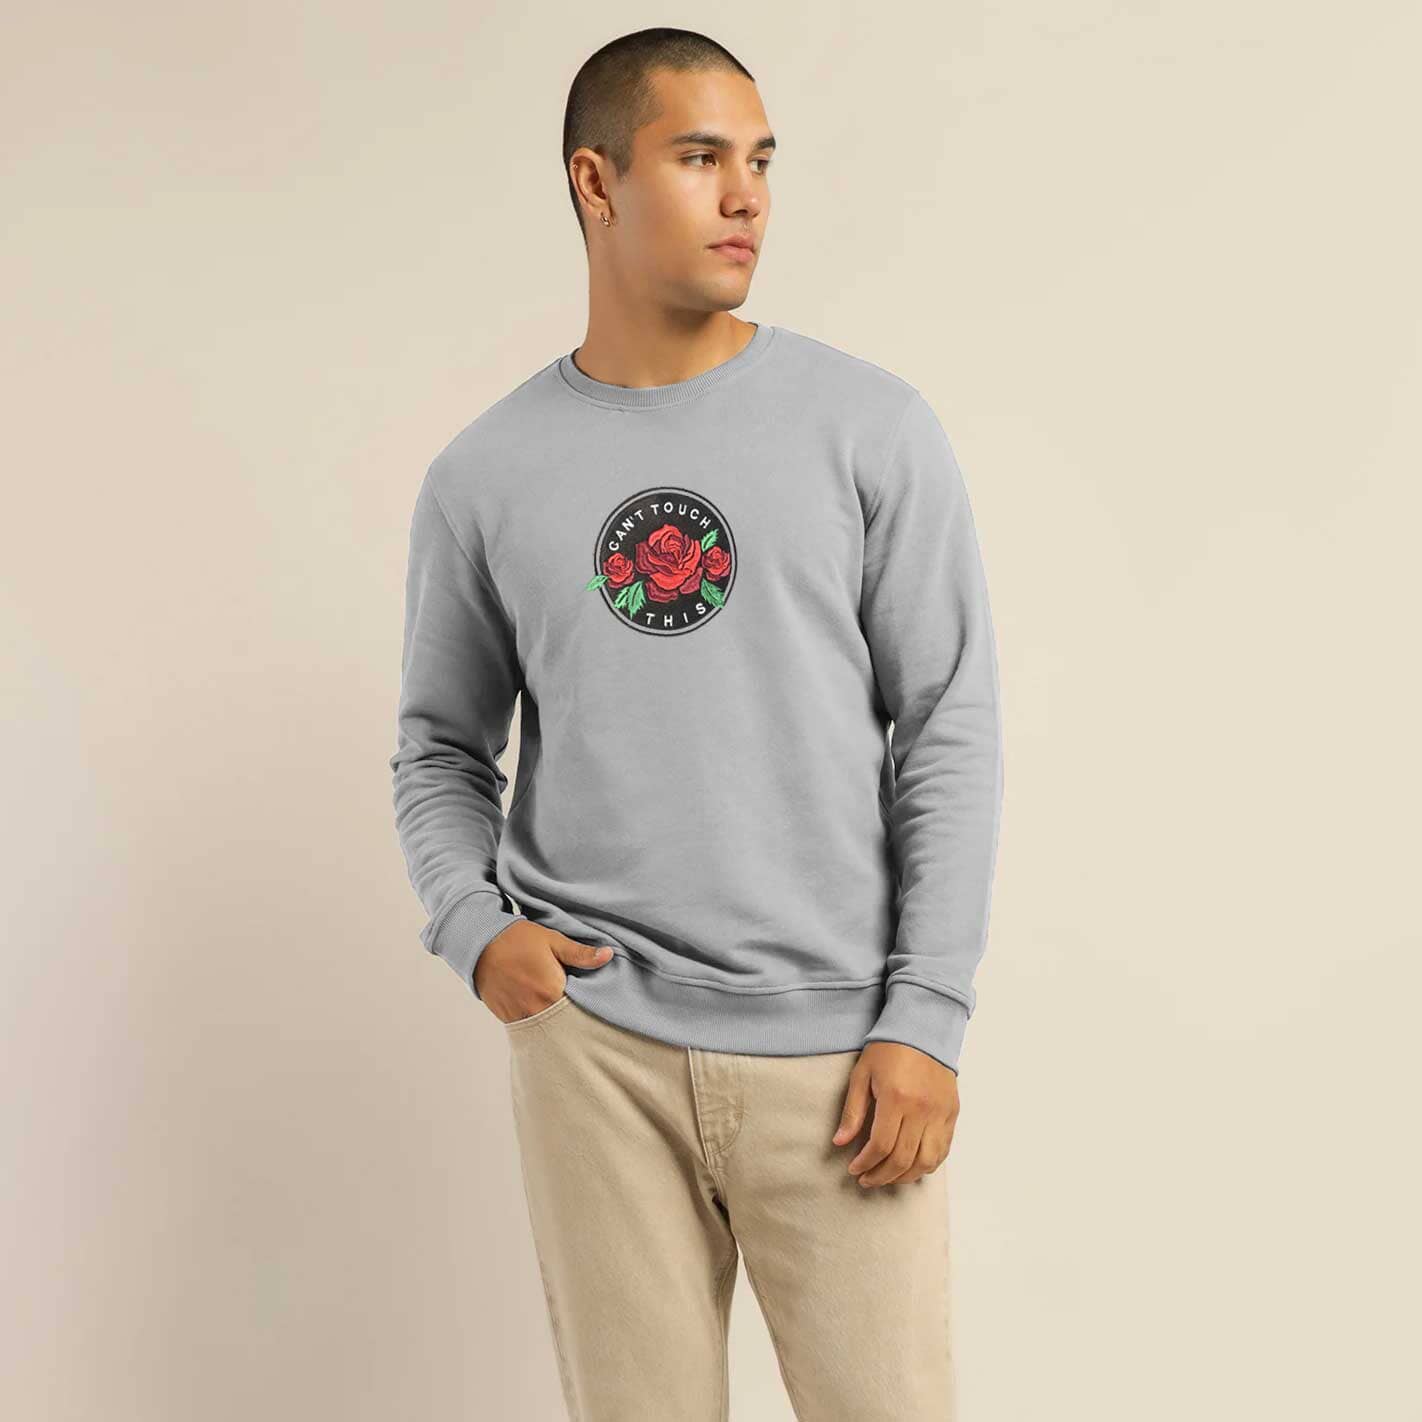 Polo Republica Men's Can't Touch Embroidered Fleece Sweat Shirt Men's Sweat Shirt Polo Republica Stealth Grey S 